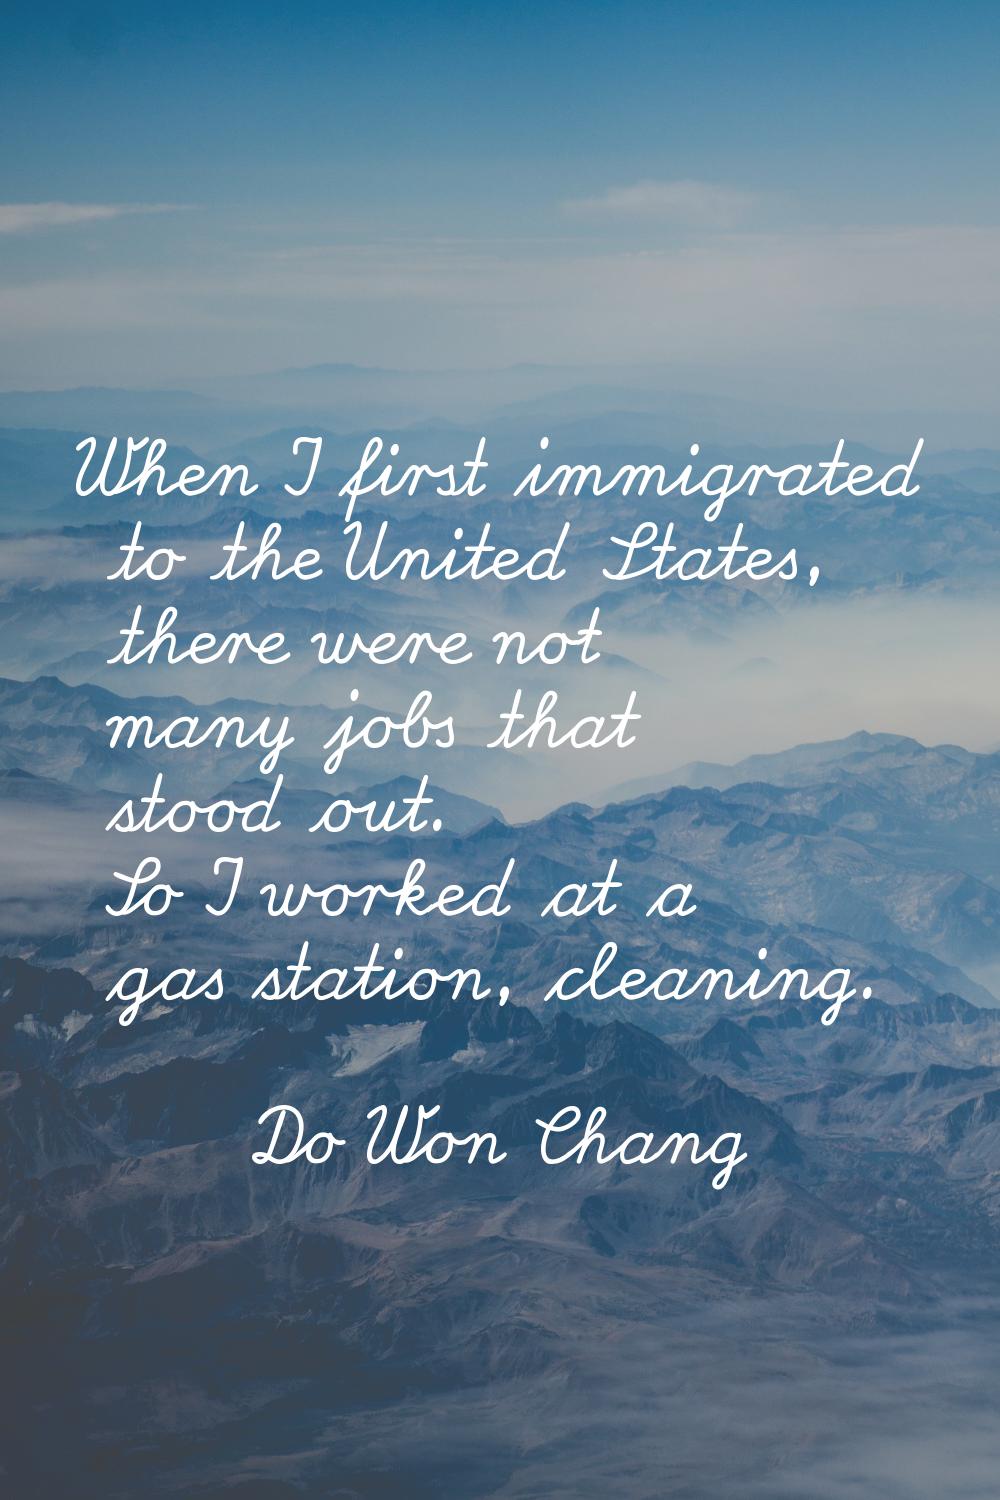 When I first immigrated to the United States, there were not many jobs that stood out. So I worked 